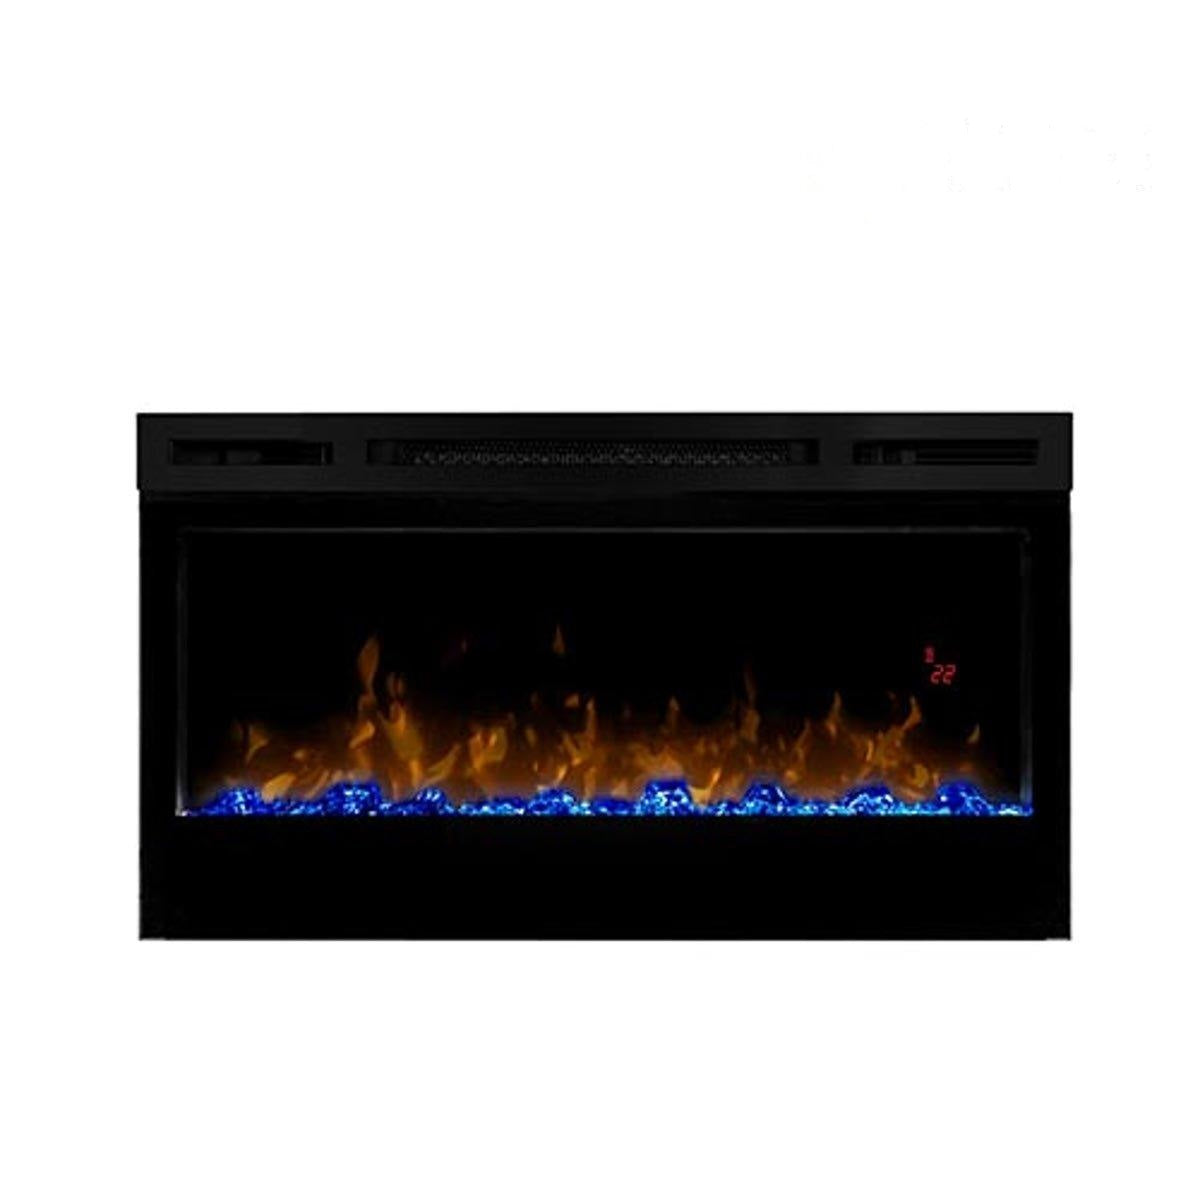 Dimplex 34" Wall-Mounted PRISM Electric Fire